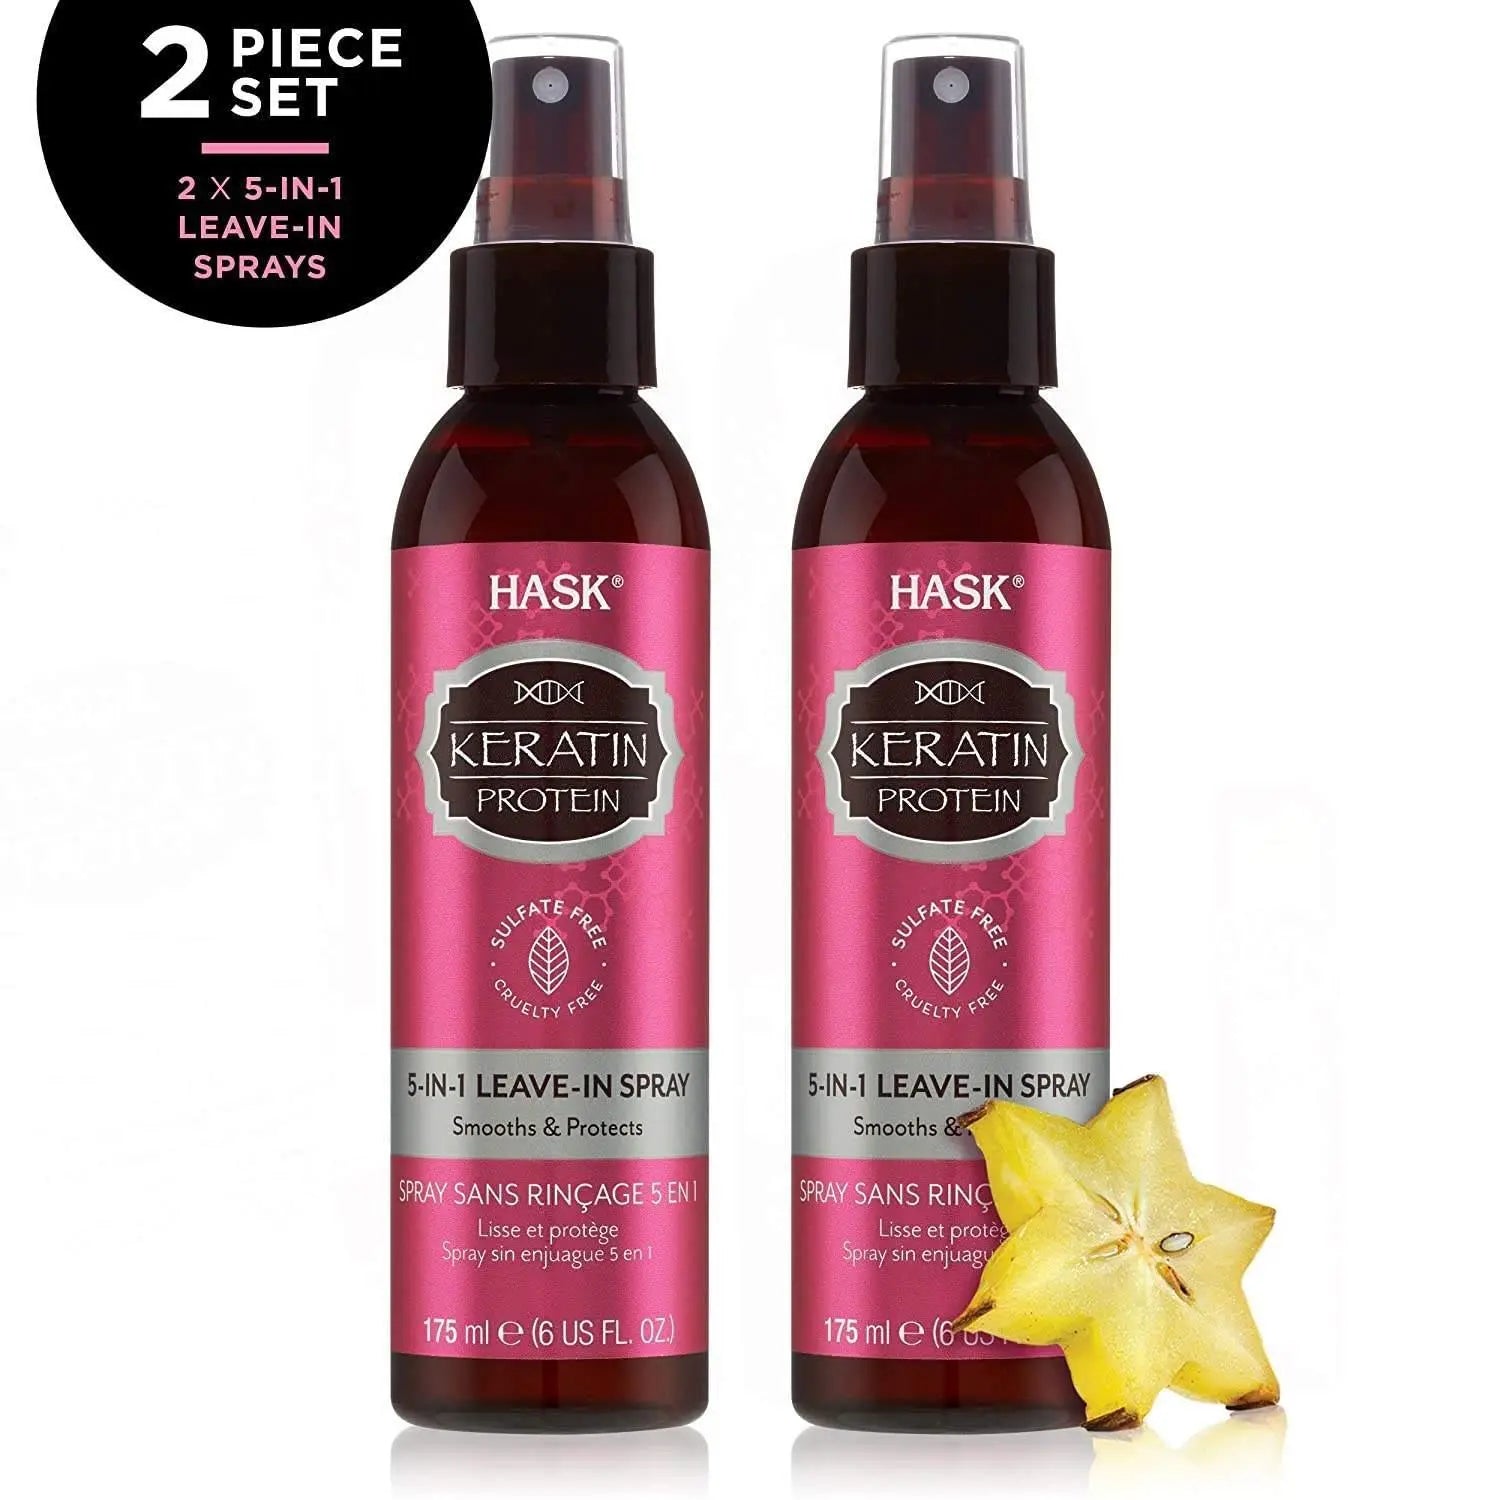 Wholesale prices with free shipping all over United States HASK Keratin Protein 5-in-1 Leave-In (6 oz., 2 pk.) - Steven Deals